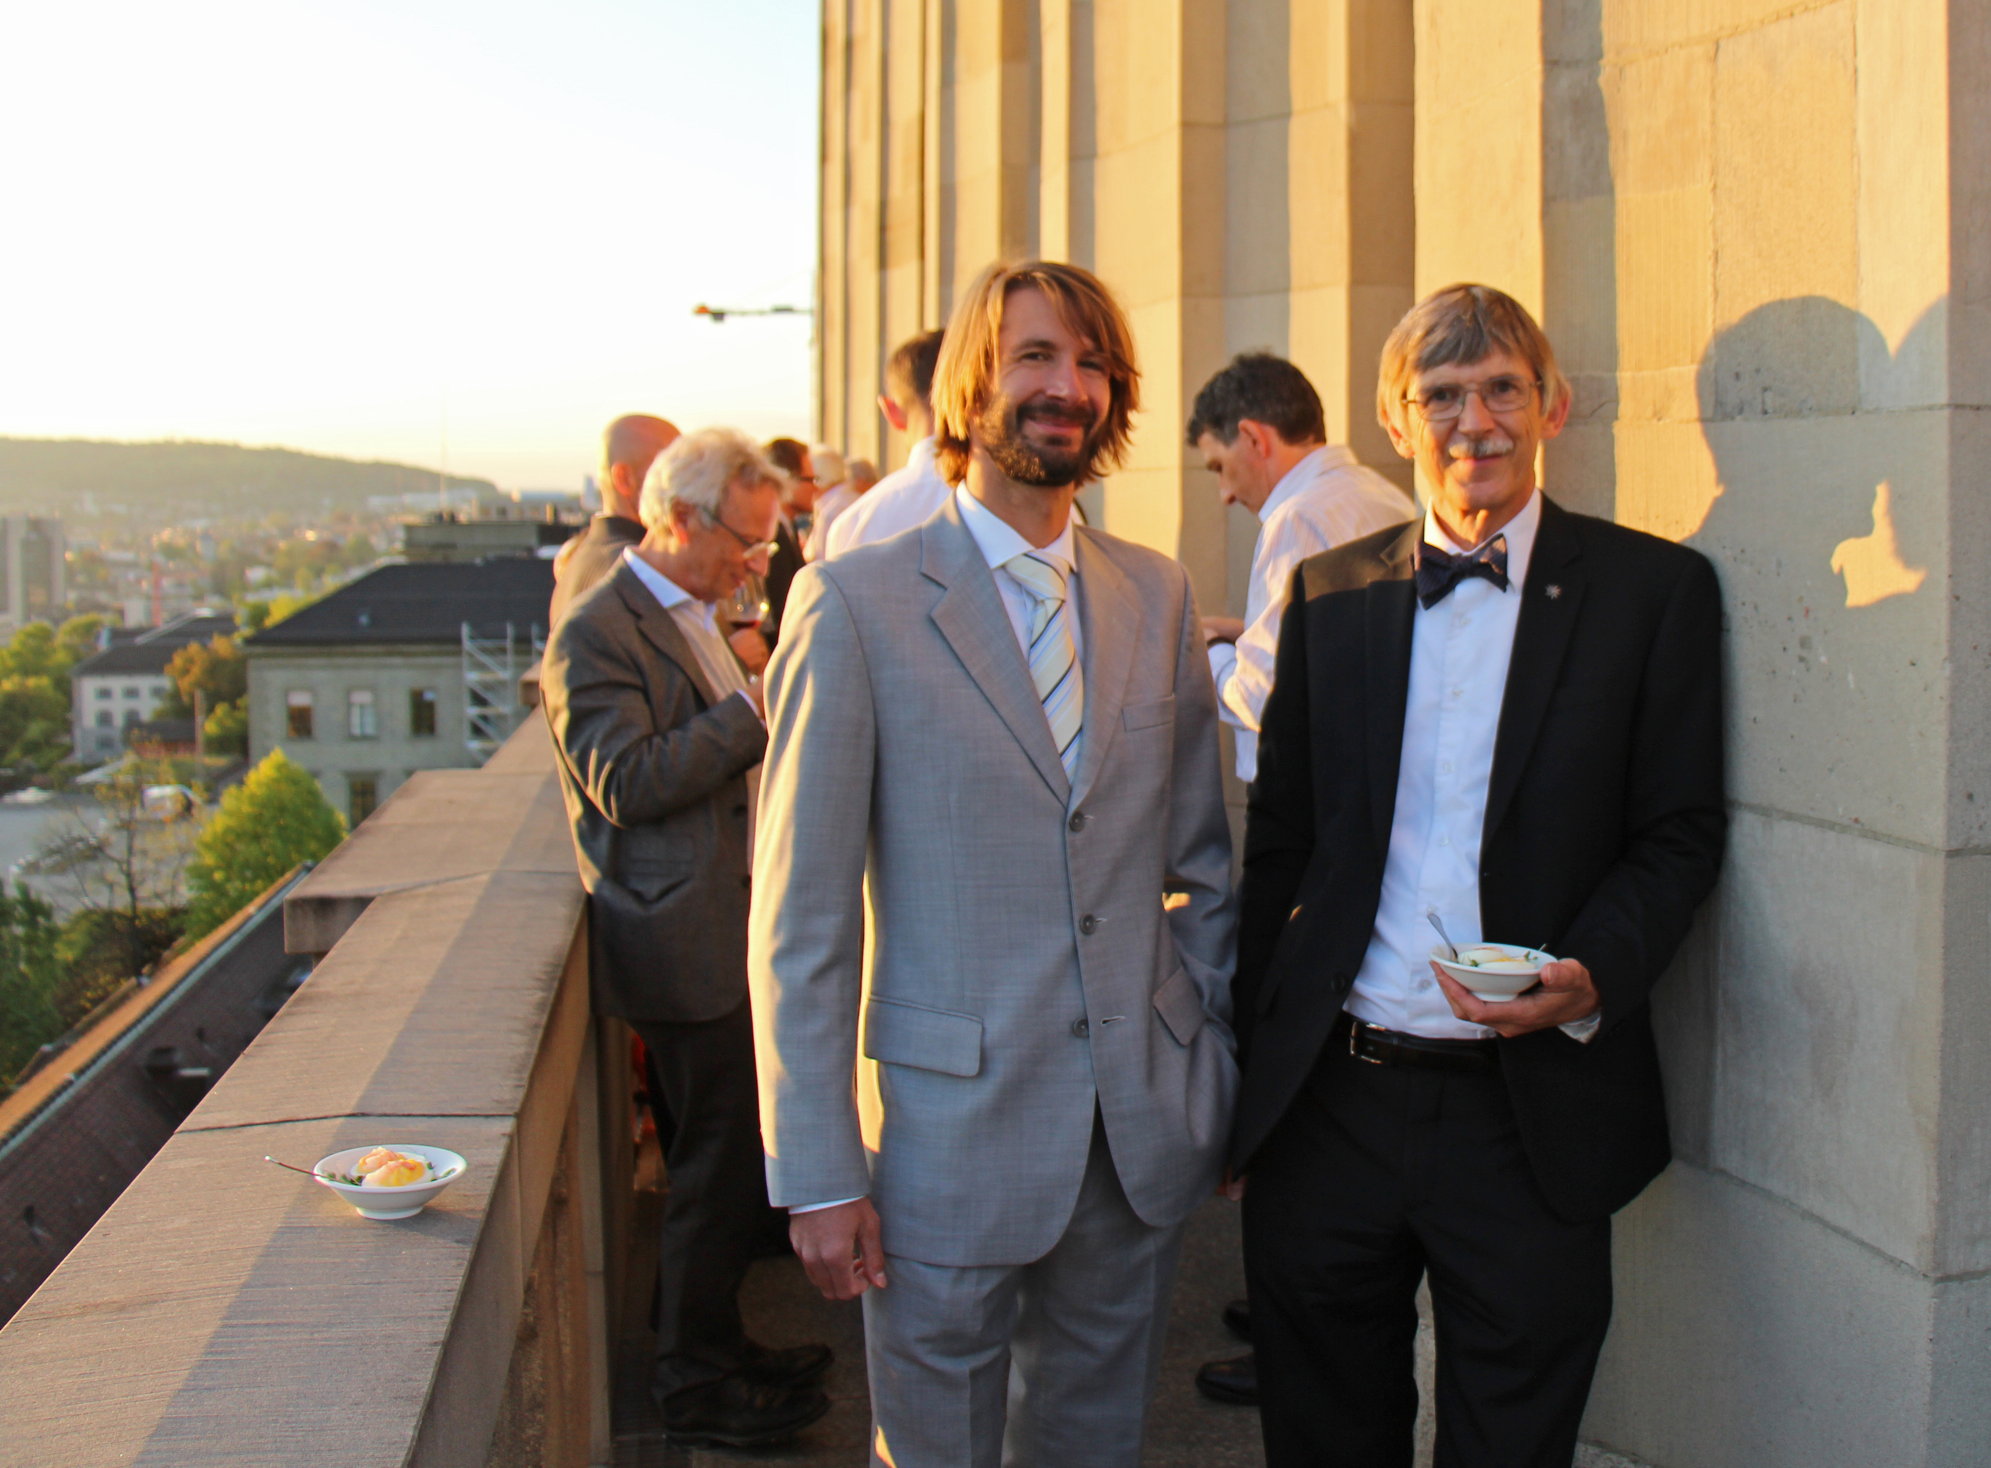 Martin Glinz at the reception after his farewell lecture